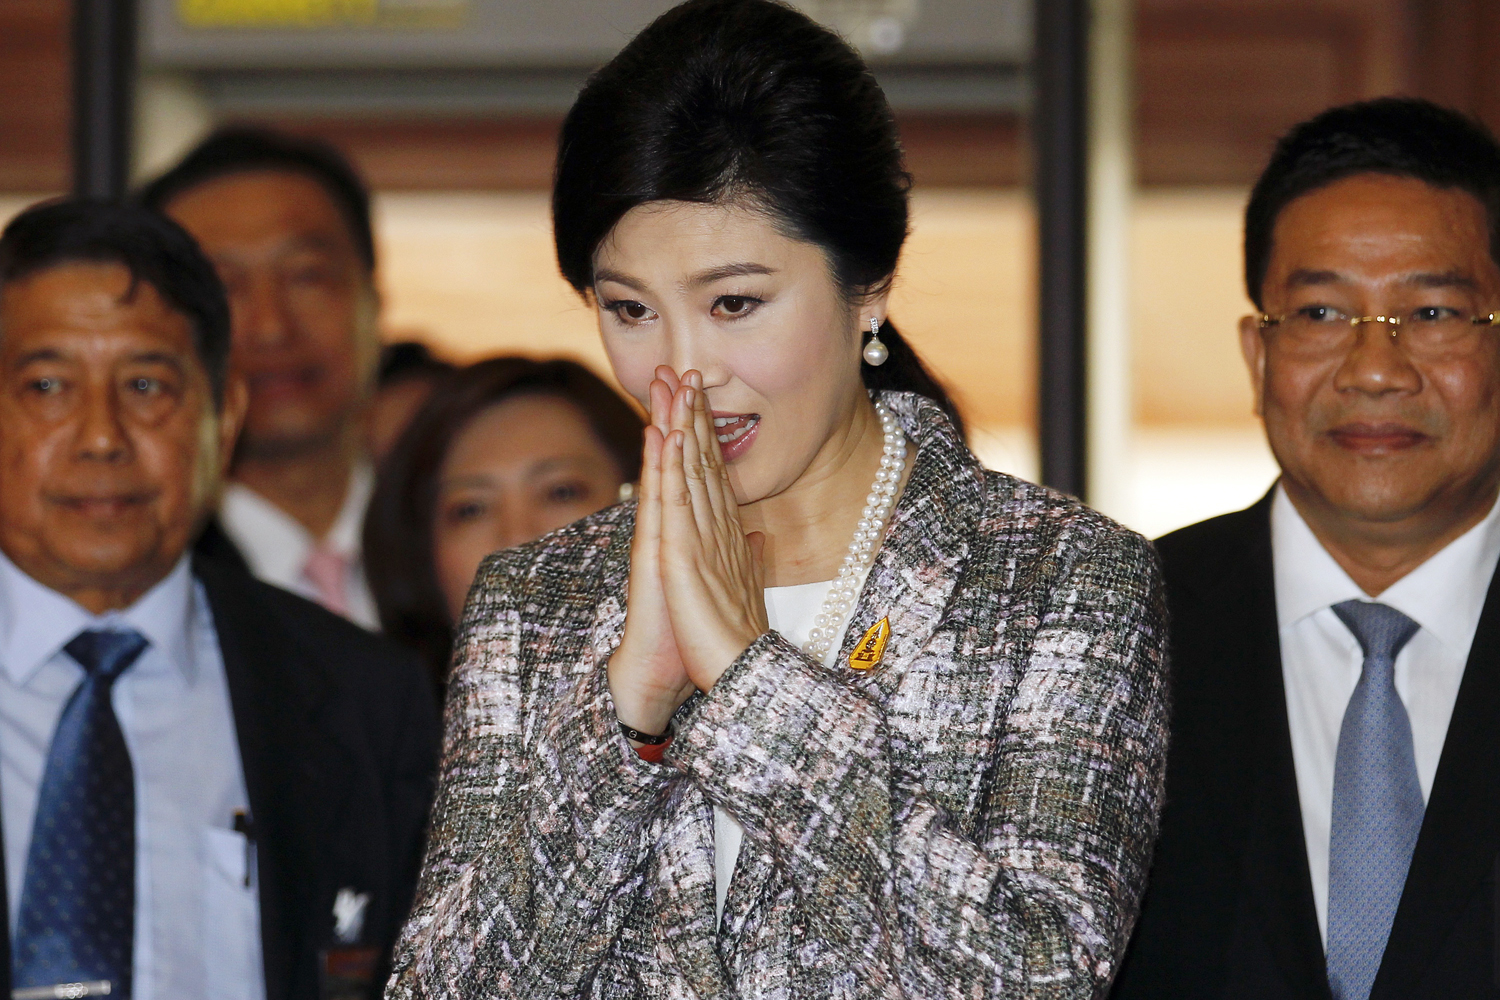 Ousted former Prime Minister Yingluck Shinawatra arrives at Parliament before the National Legislative Assembly meeting in Bangkok on Jan. 22, 2015 (Chaiwat Subprasom —Reuters)